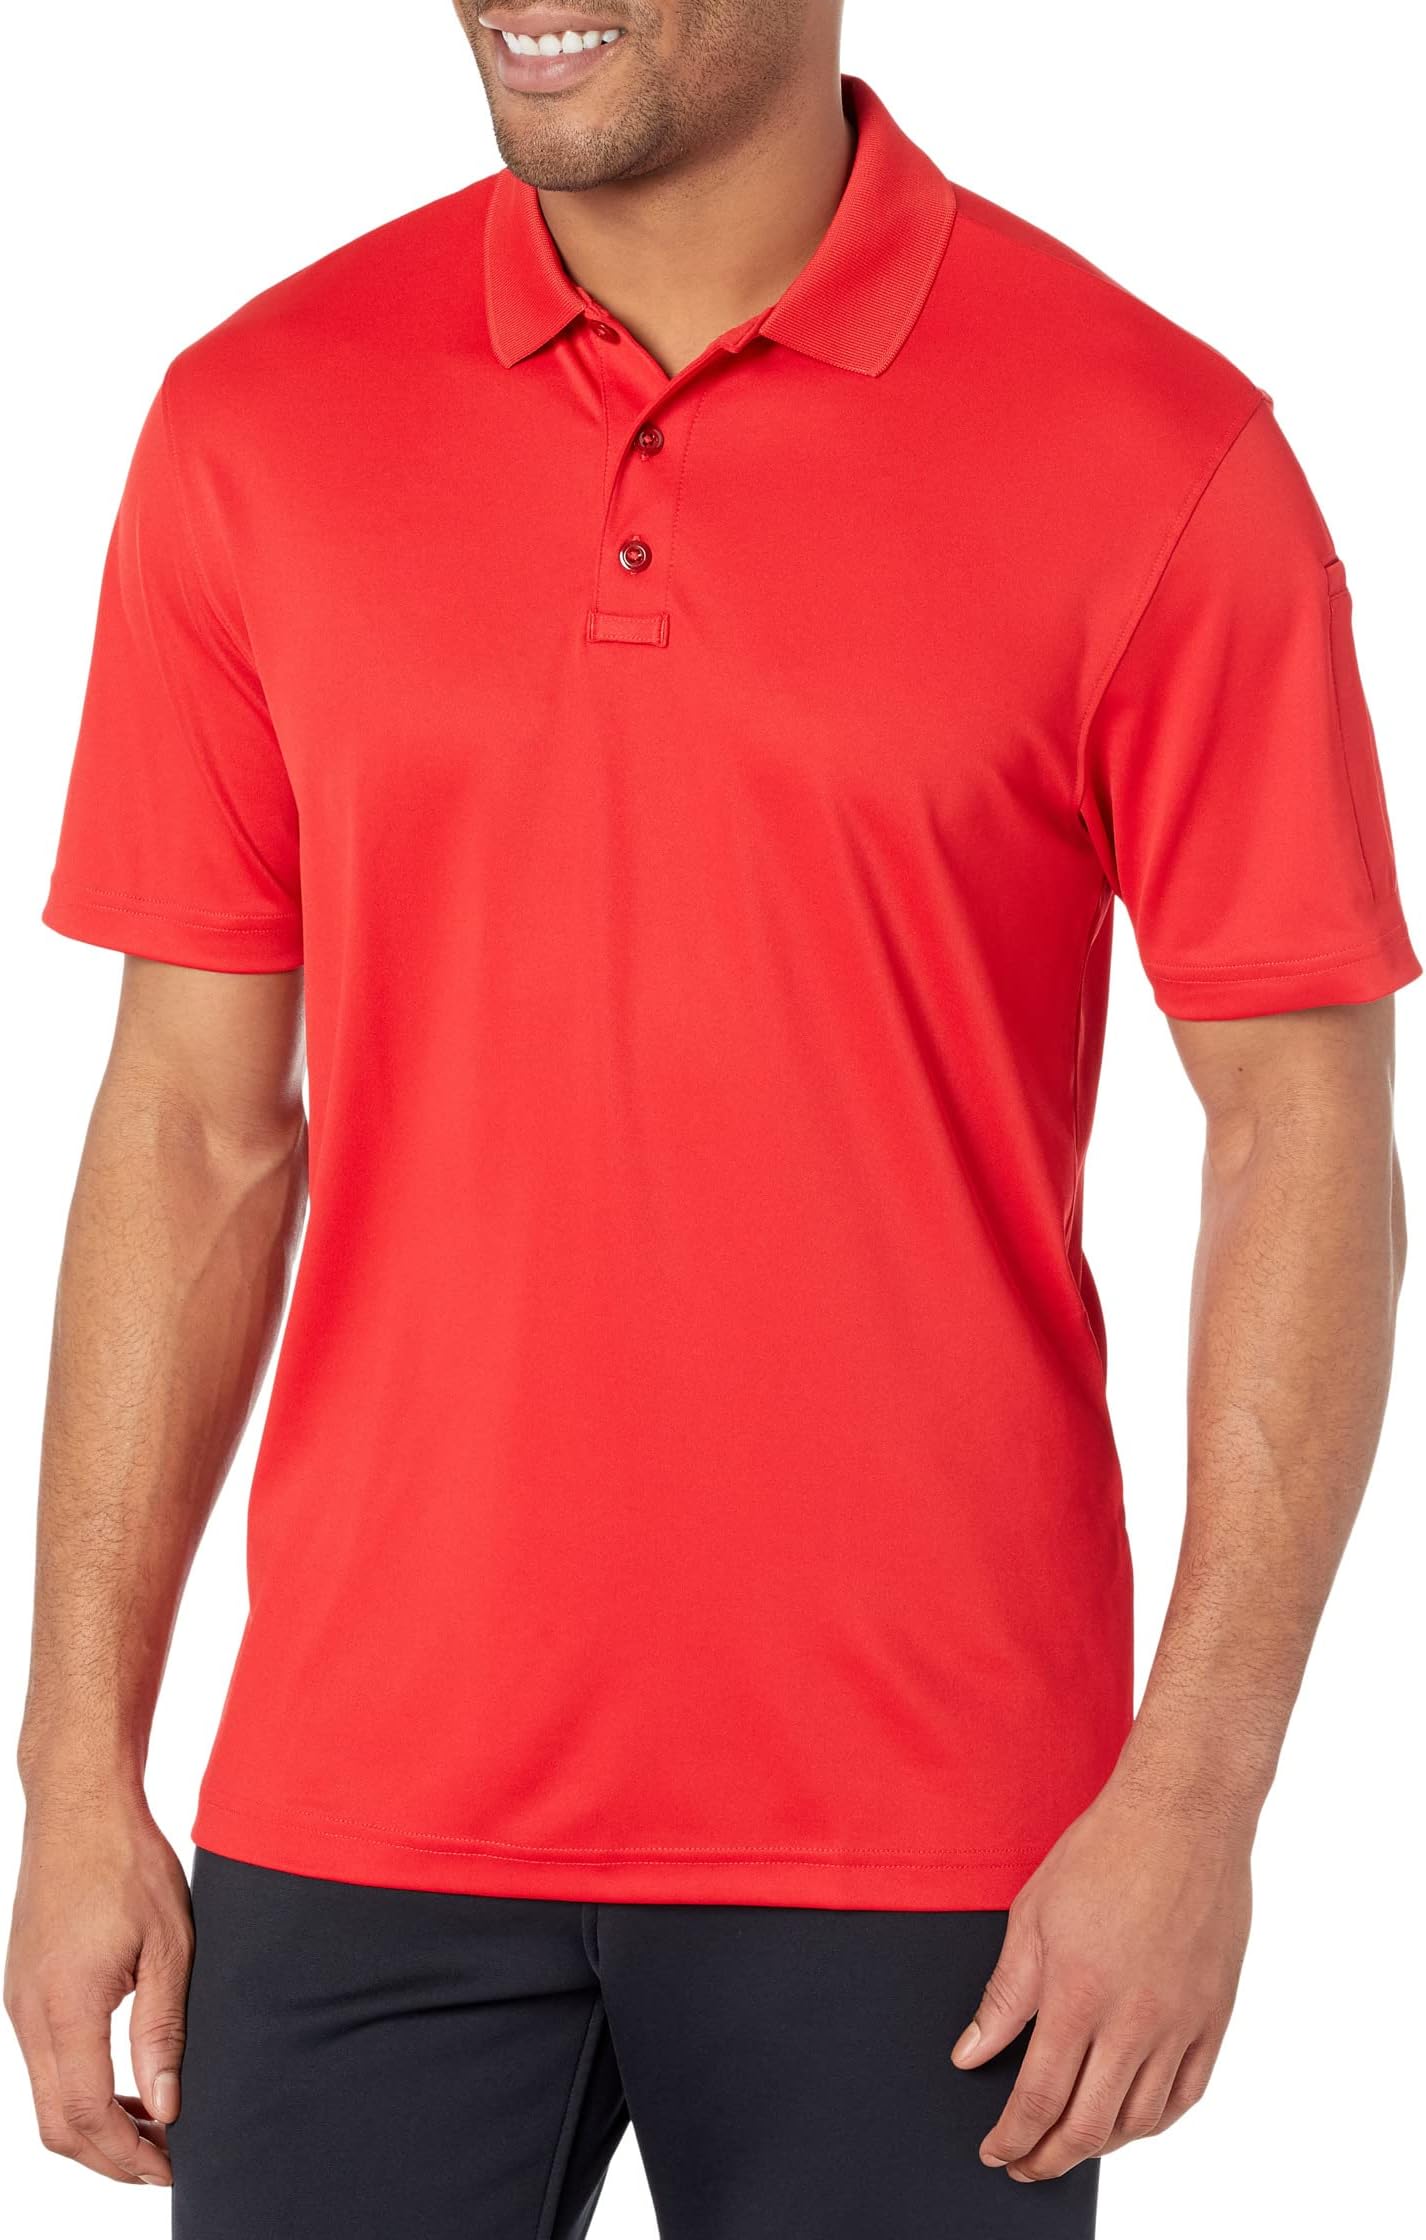 lynch s red seas under red skies Tac Performance Polo 2.0 Under Armour, цвет Red/Red